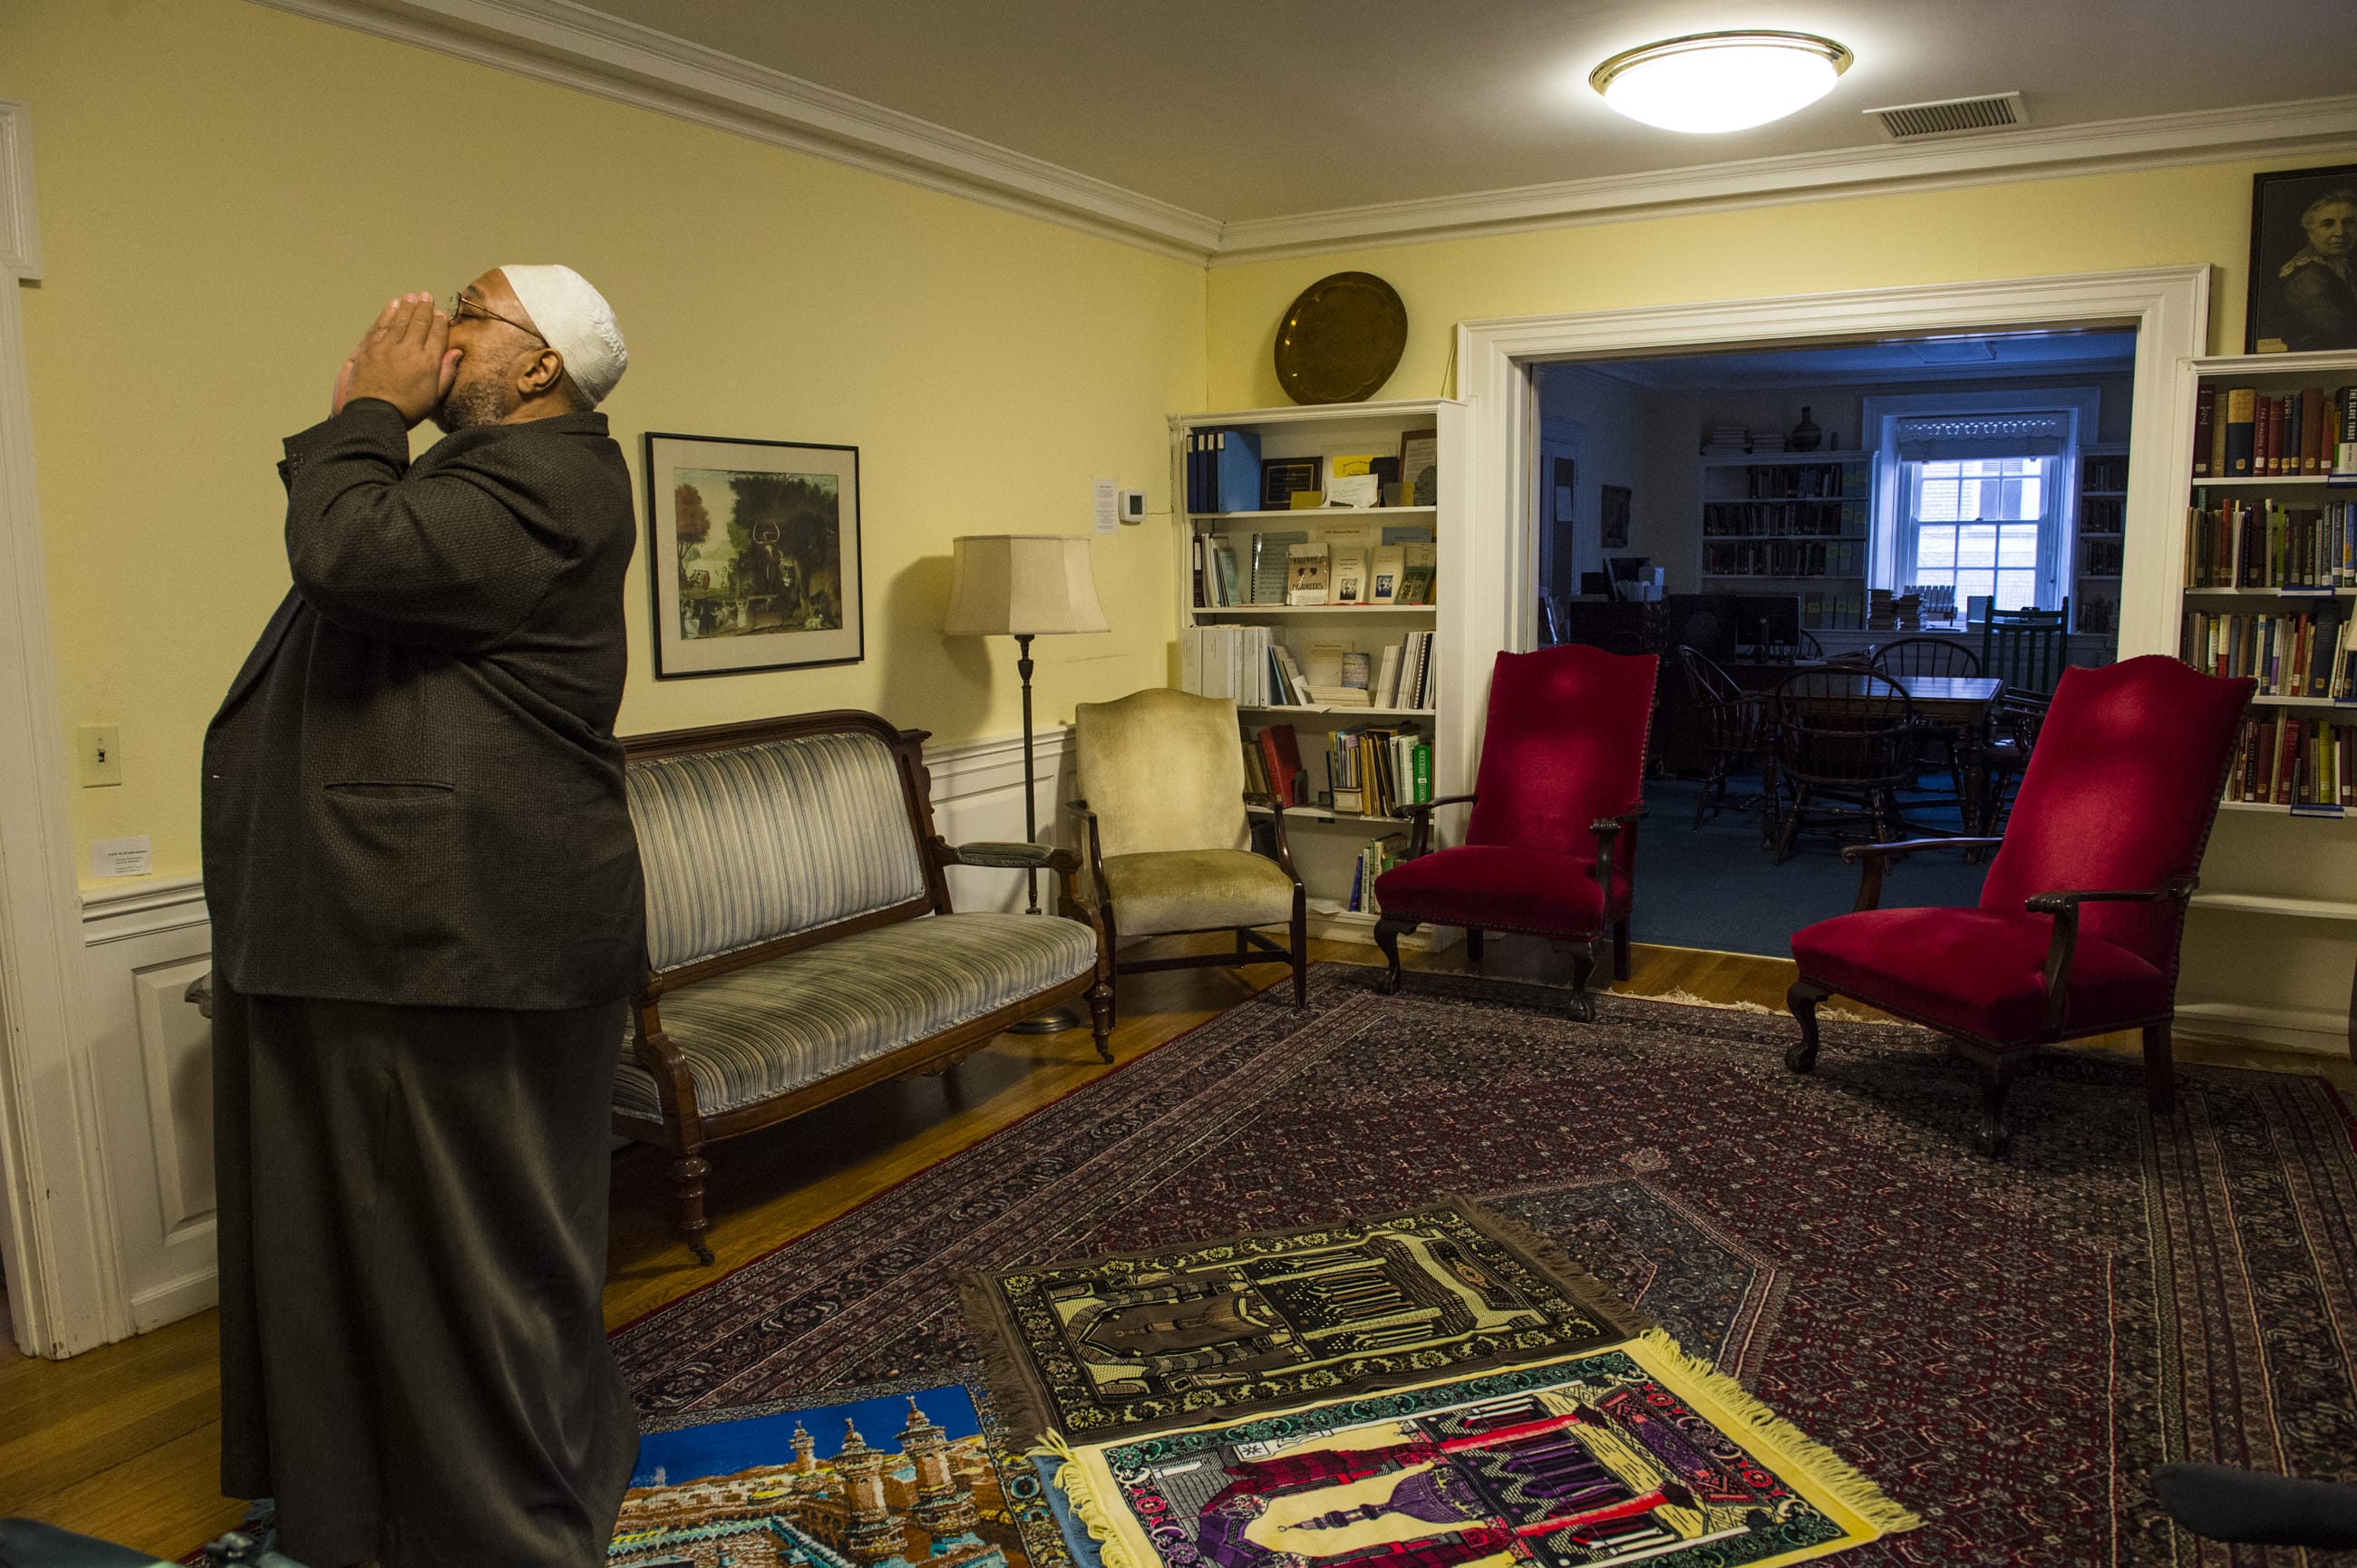 Daayiee Abdullah, at the Light of Reform mosque in Washington, is thought to be the only publicly gay Muslim religious leader in the Western Hemisphere.